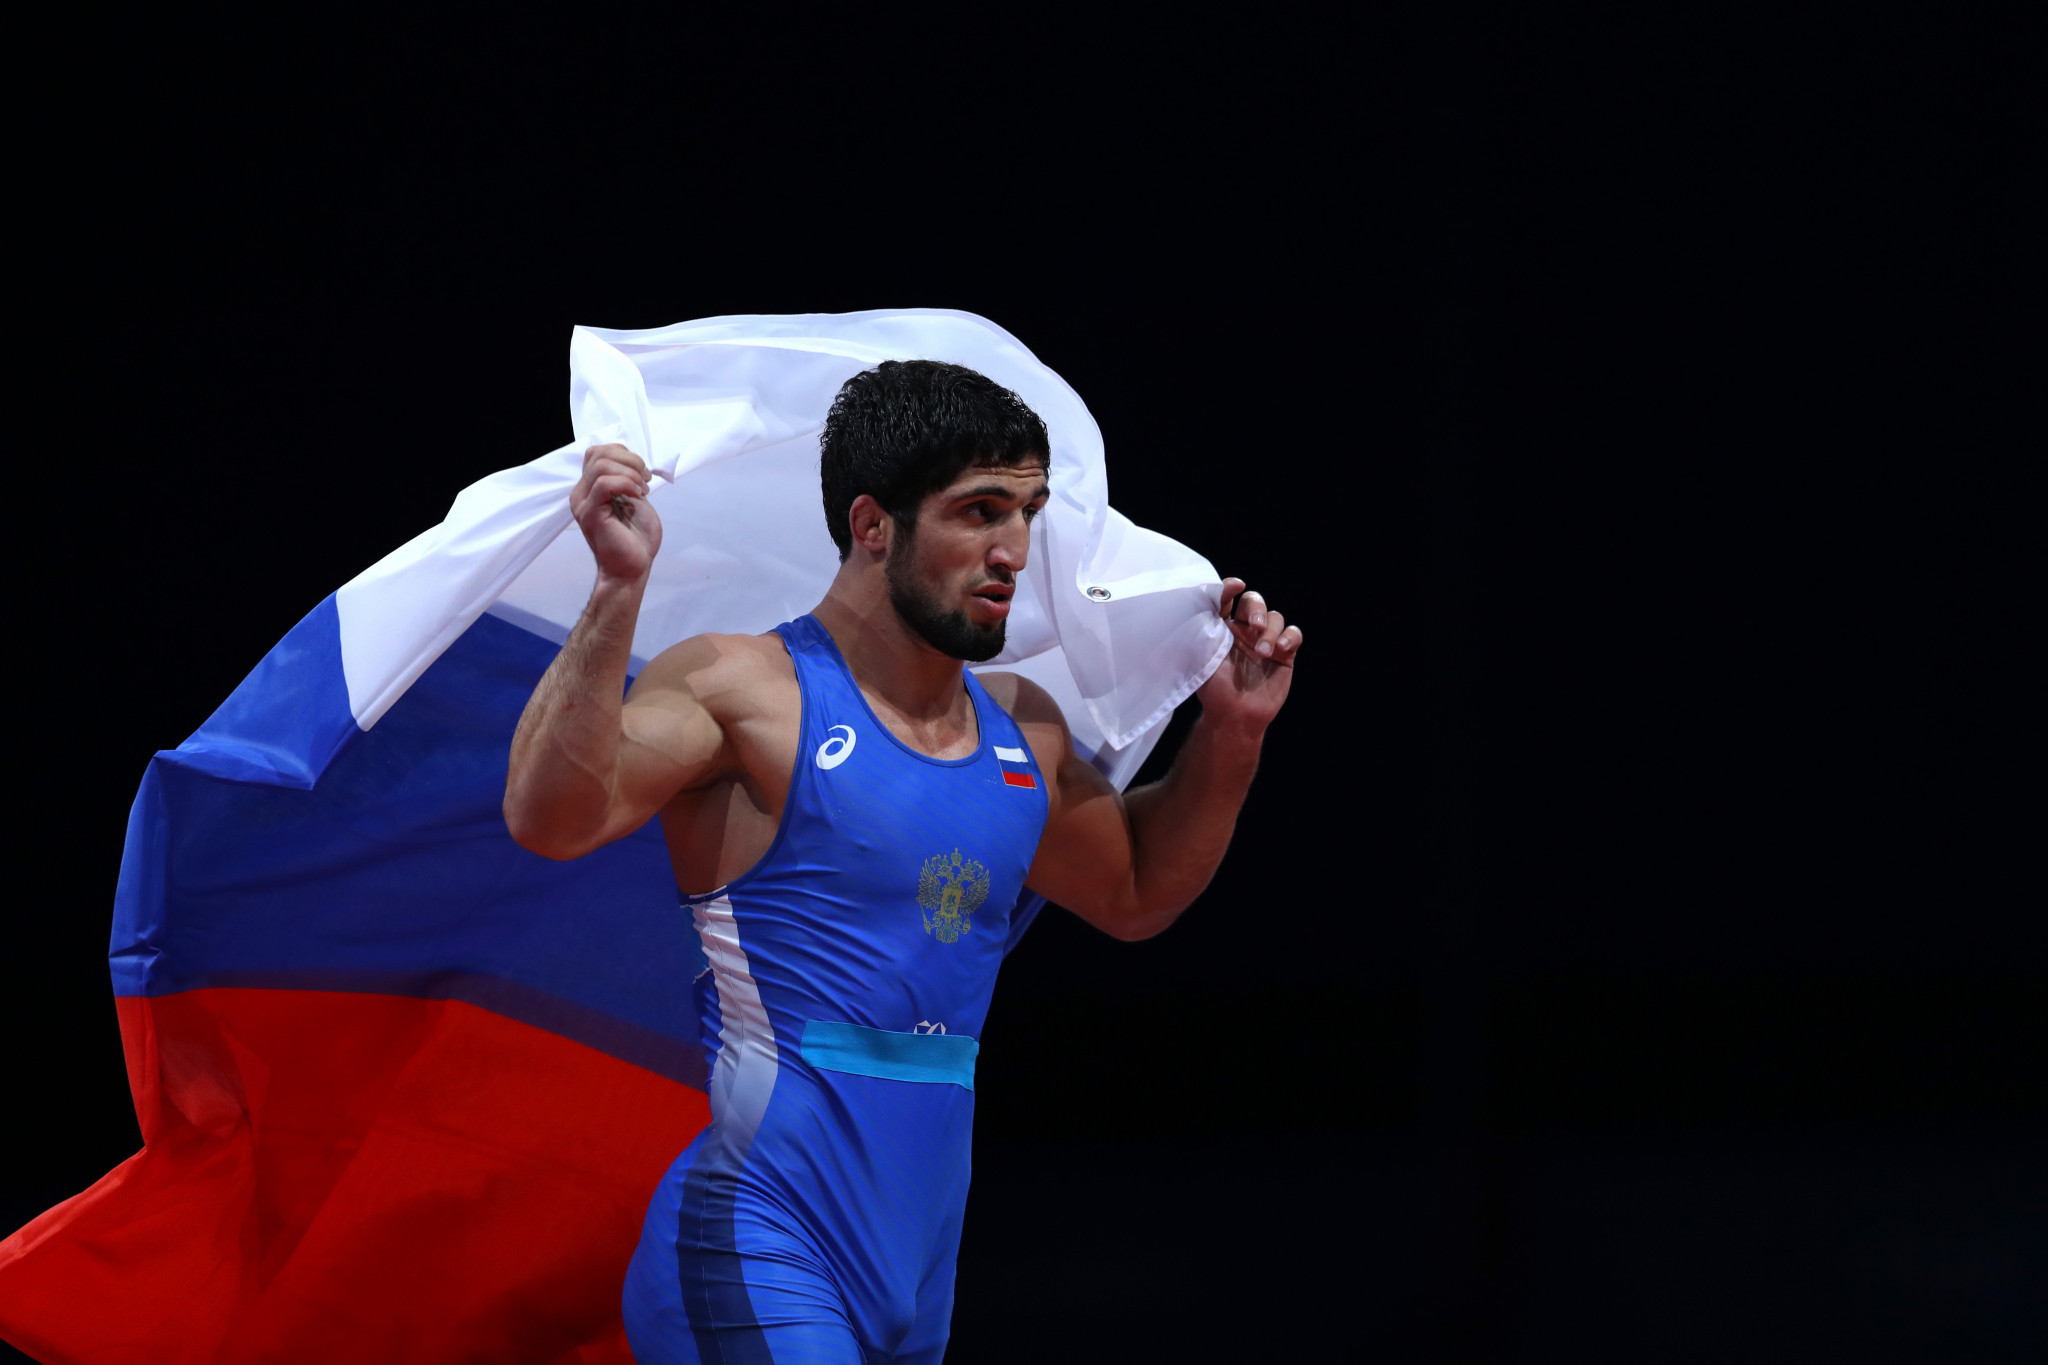 Russian wrestler to represent Greece at European Championships, says coach